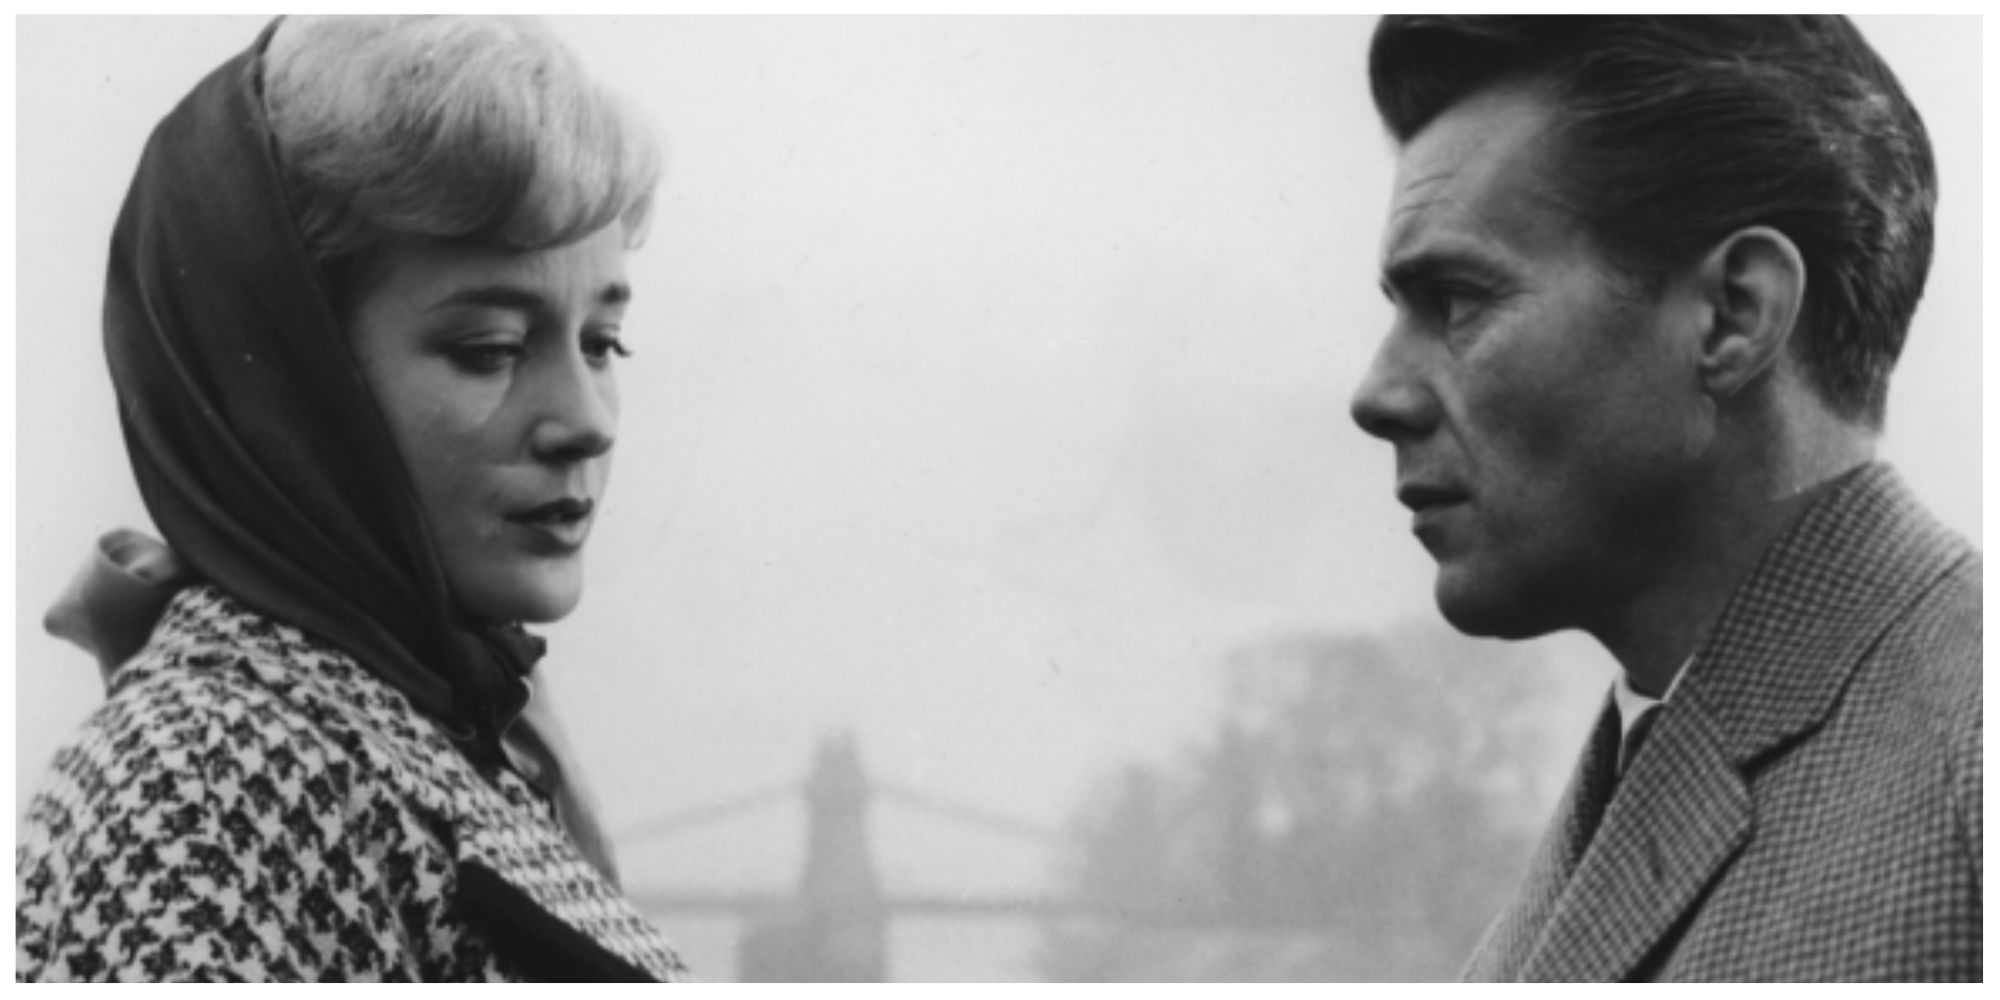 Laura (Sylvia Syms, left) and Melville Farr (Dirk Bogarde) from the film looking at each other in conversation outside next to the River Thames. Hammersmith Bridge can be seen in the background of the shot.